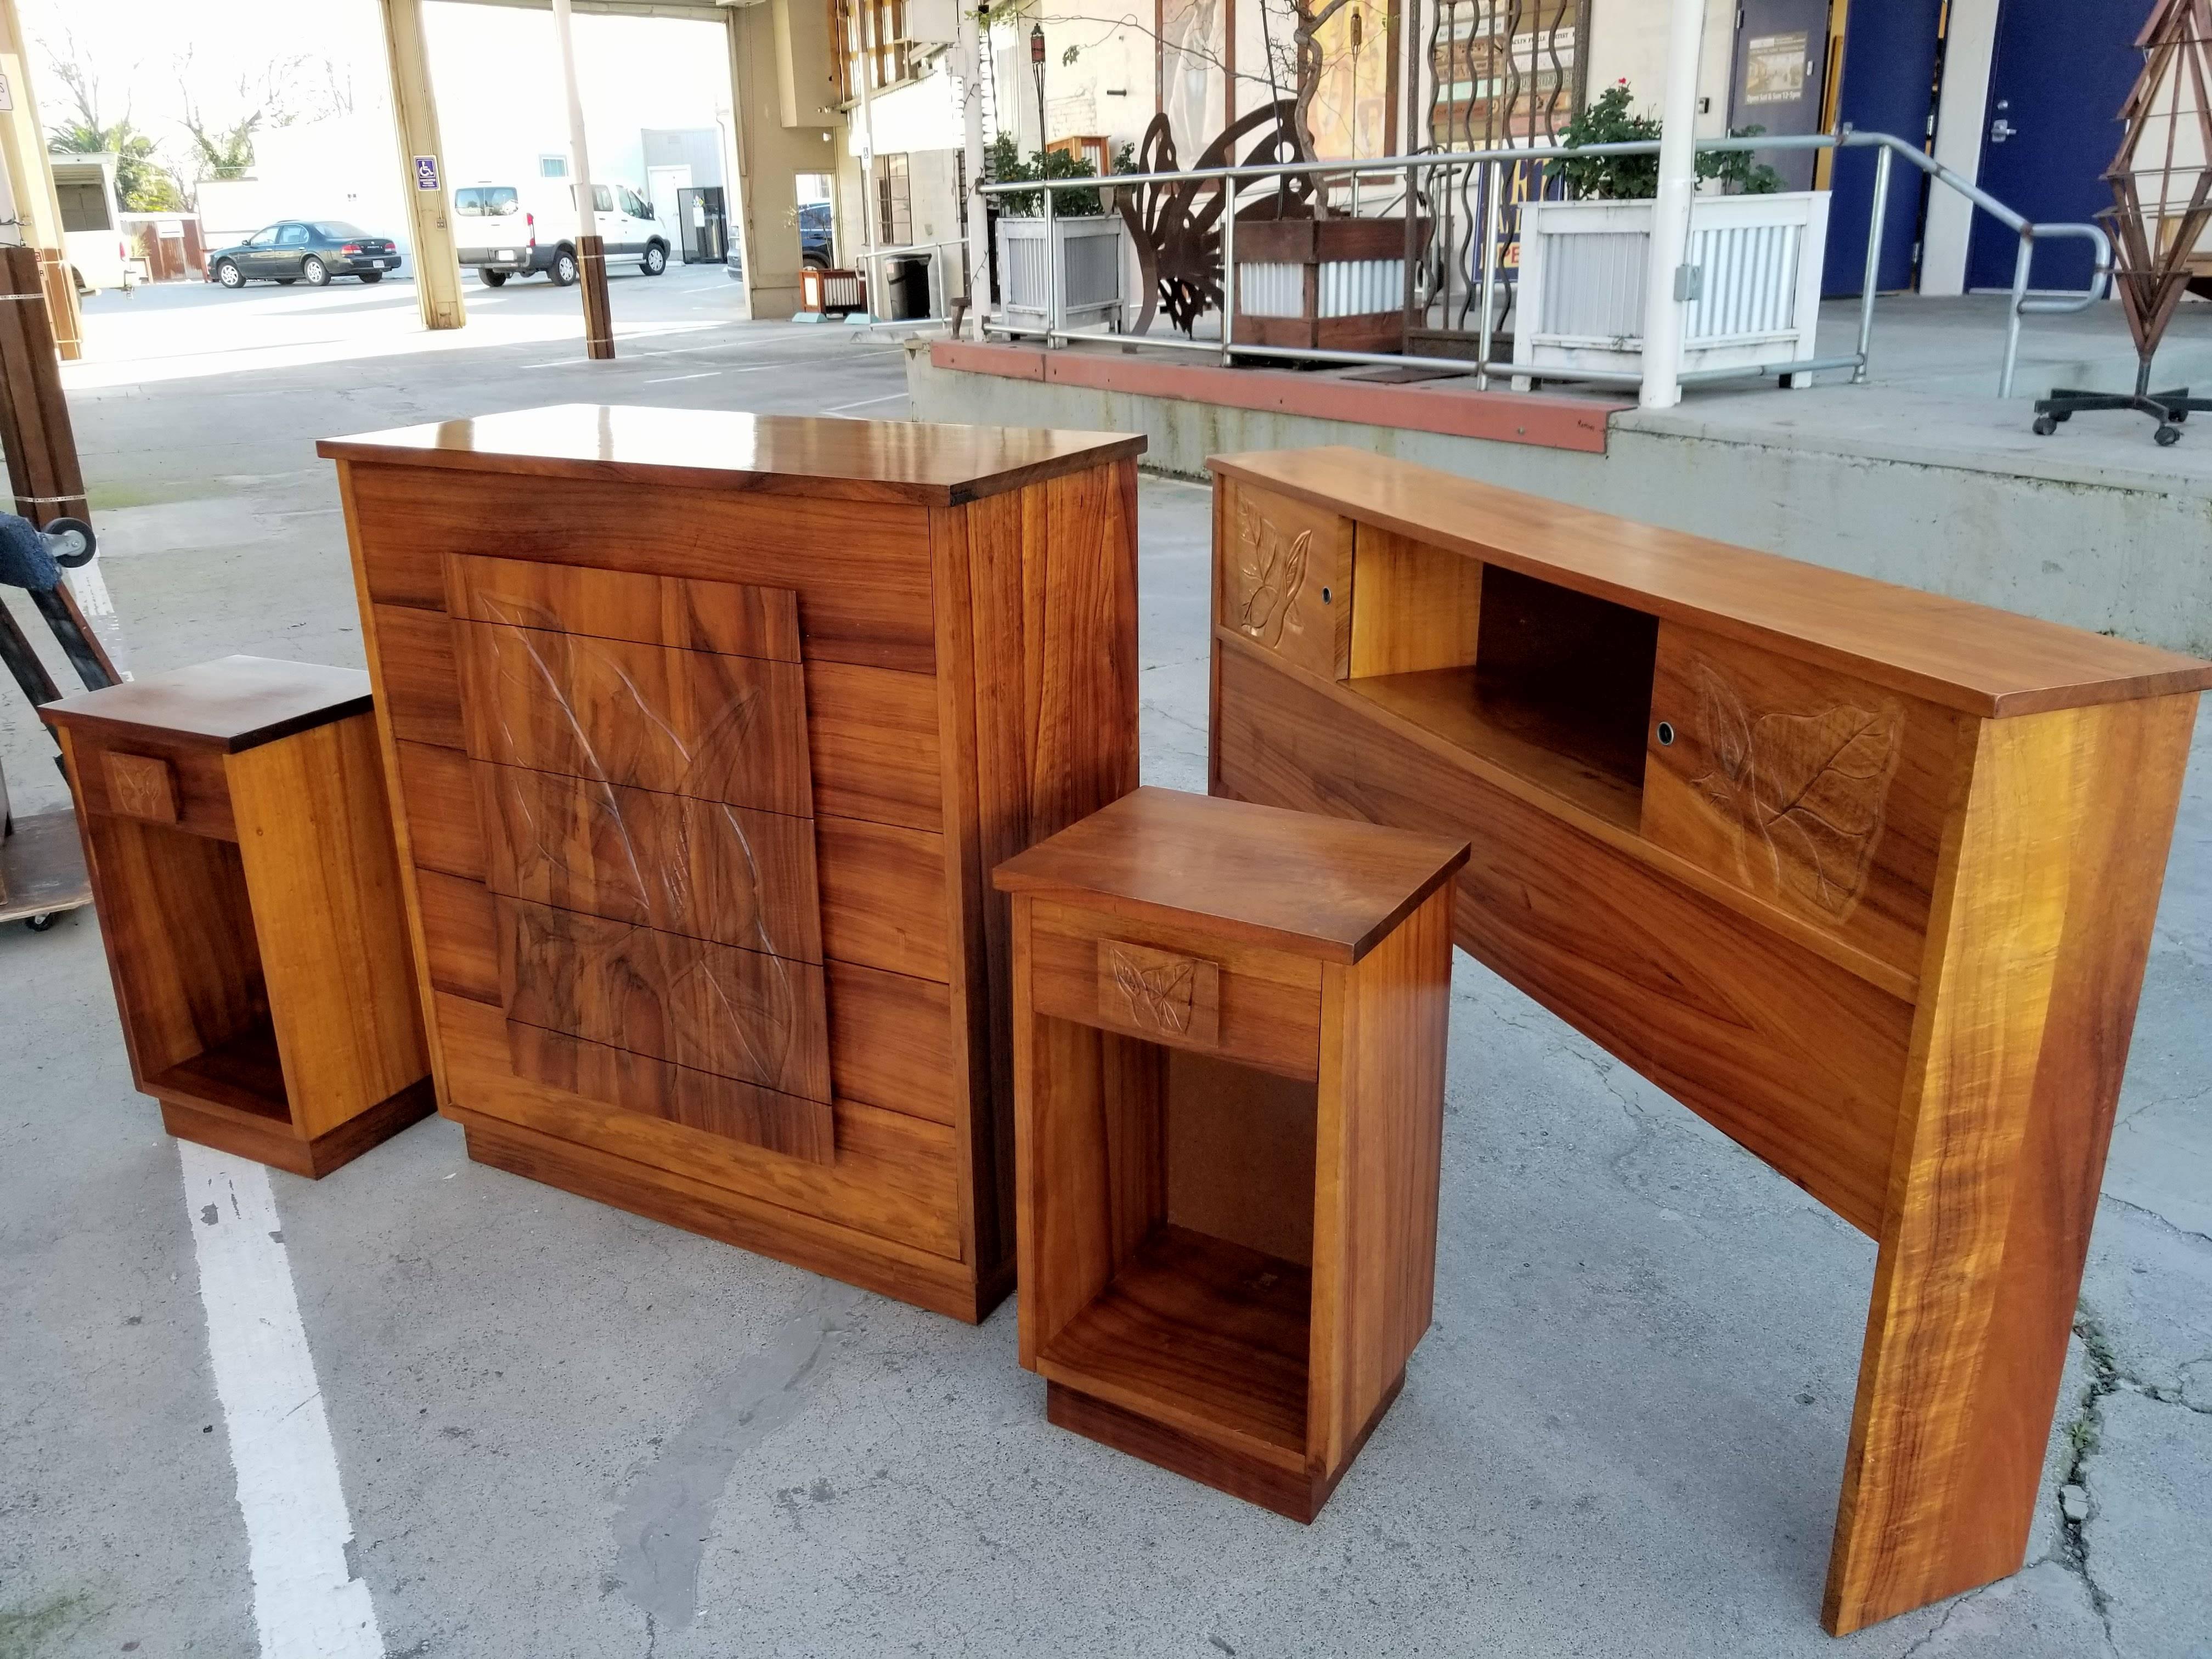 Outstanding and scarce four-piece Hawaiian Koa Polynesian style bedroom suite. Organic hand-carved anthuriam floral detail. Beautiful glow to original finish. Crafted in solid Koa and Curly Koa woods in Hawaii, circa 1960s.  Night stands measure